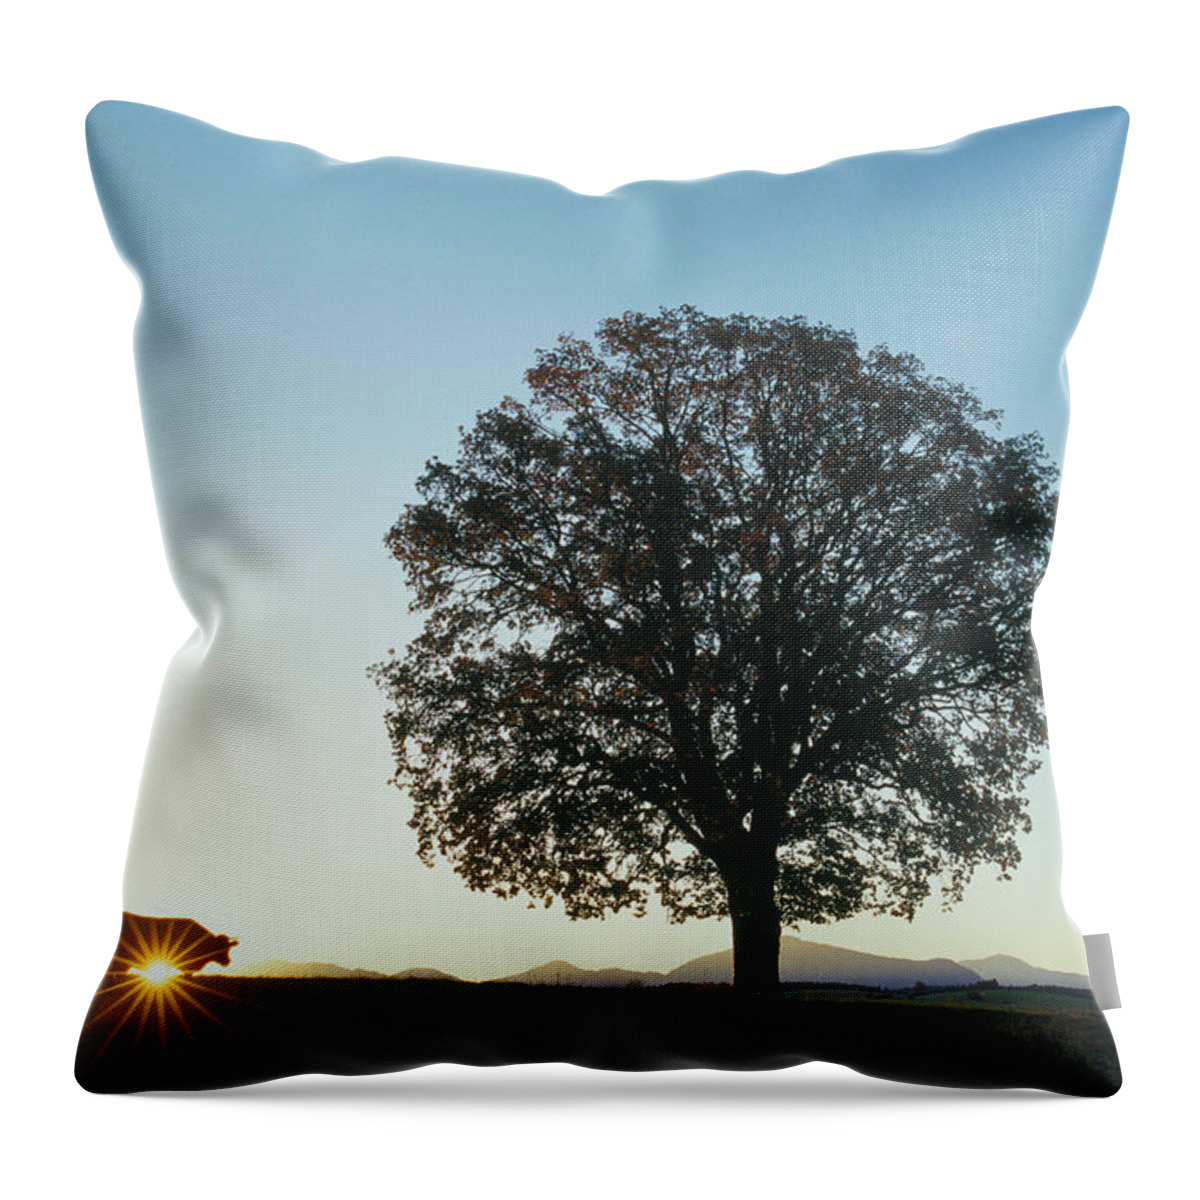 Estock Throw Pillow featuring the digital art Tree With Cow by Christian Back